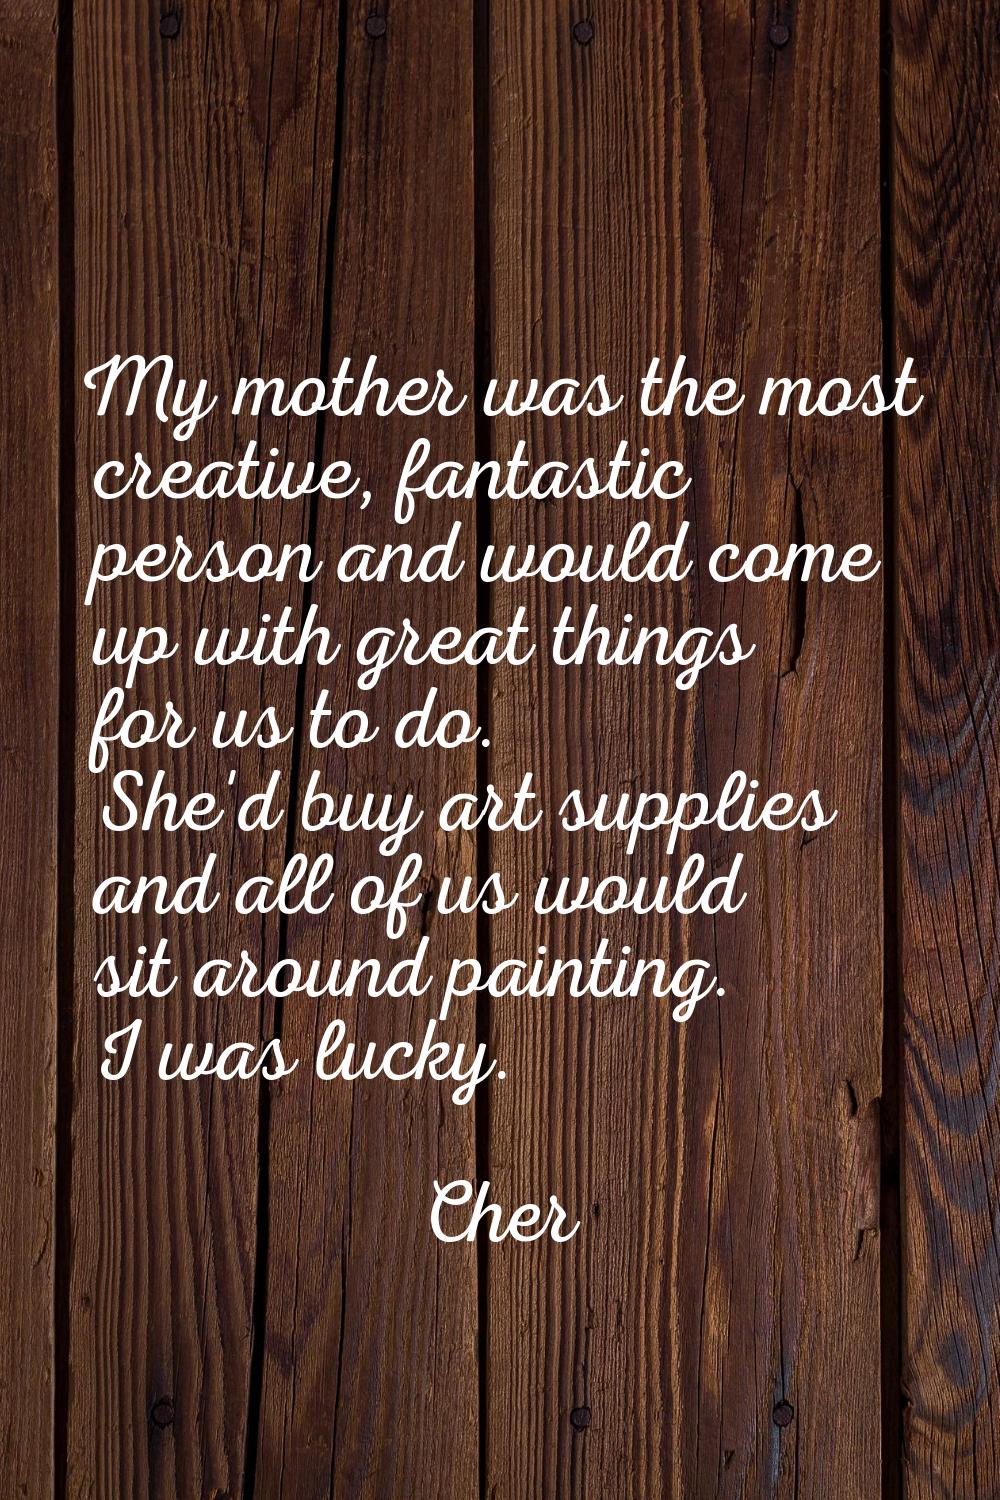 My mother was the most creative, fantastic person and would come up with great things for us to do.